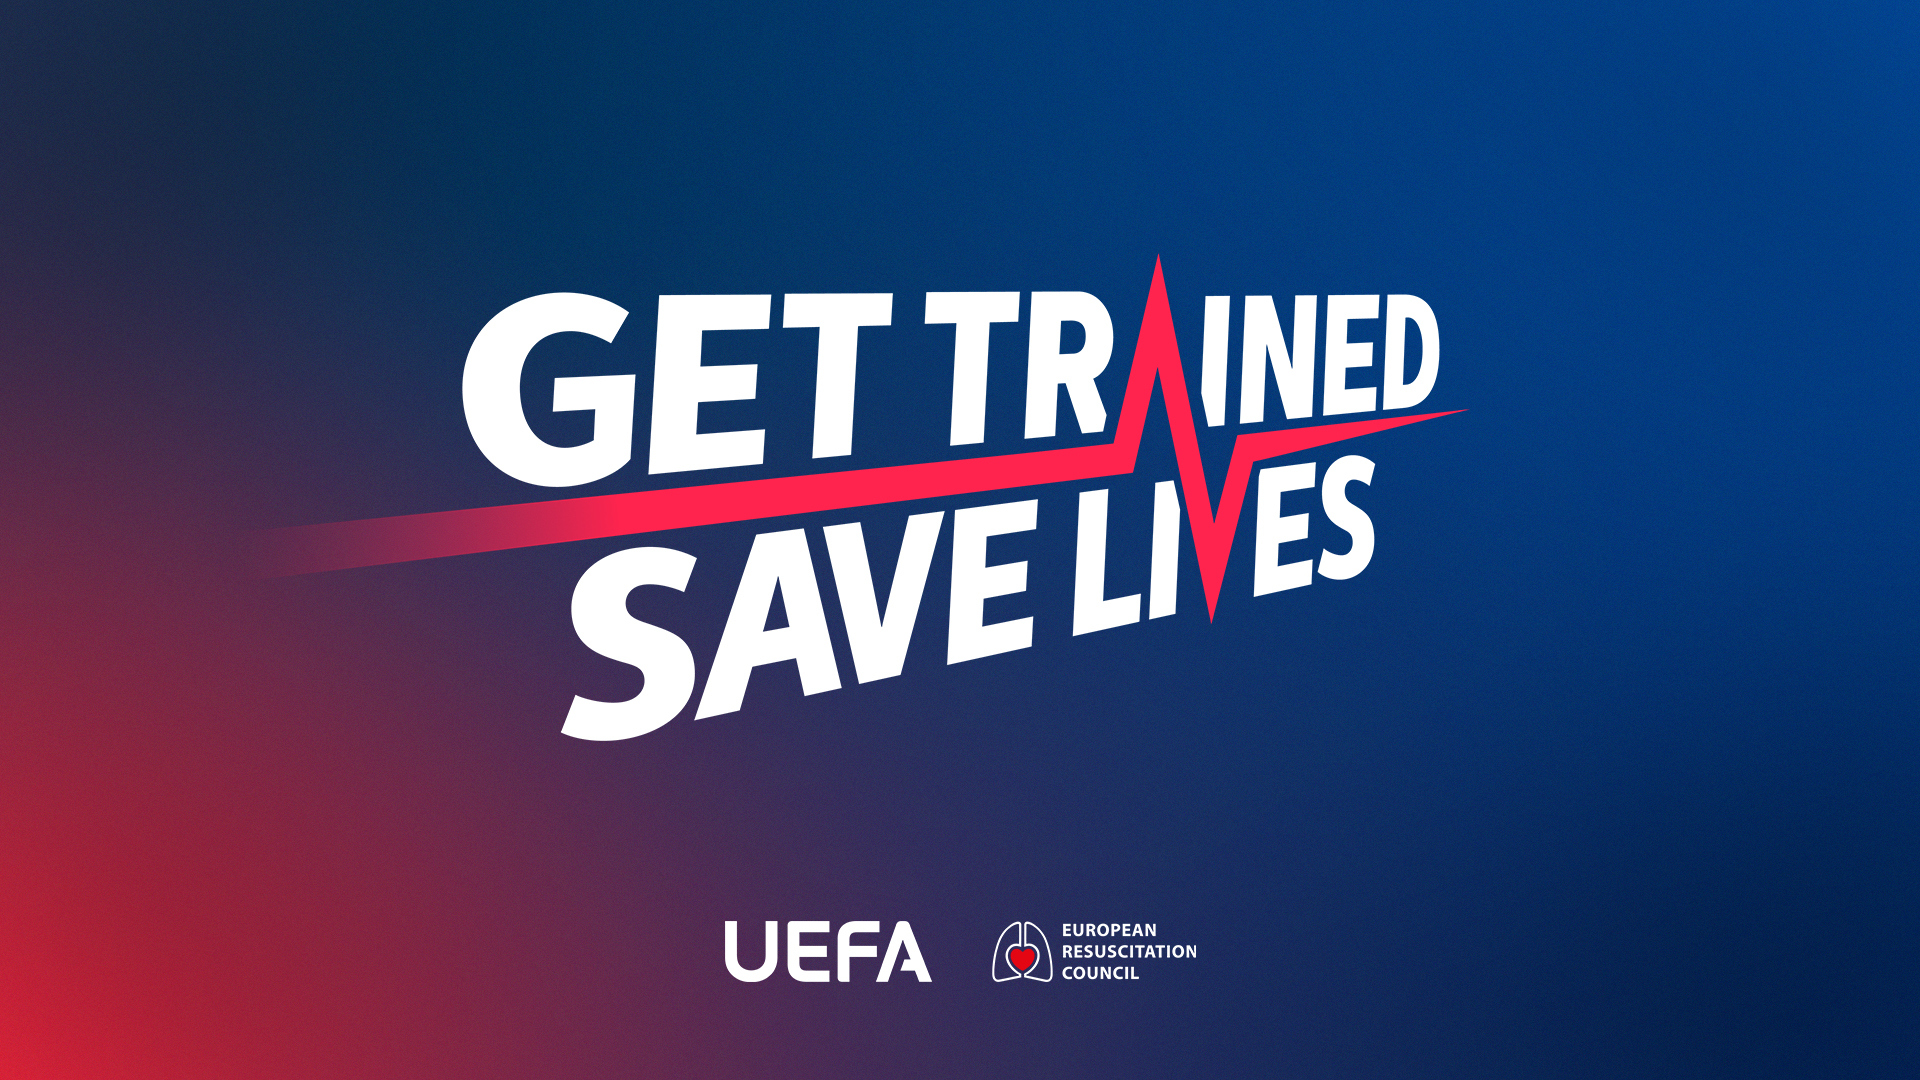 ‘Get trained, save lives’ campaign to educate football fans in CPR skills.